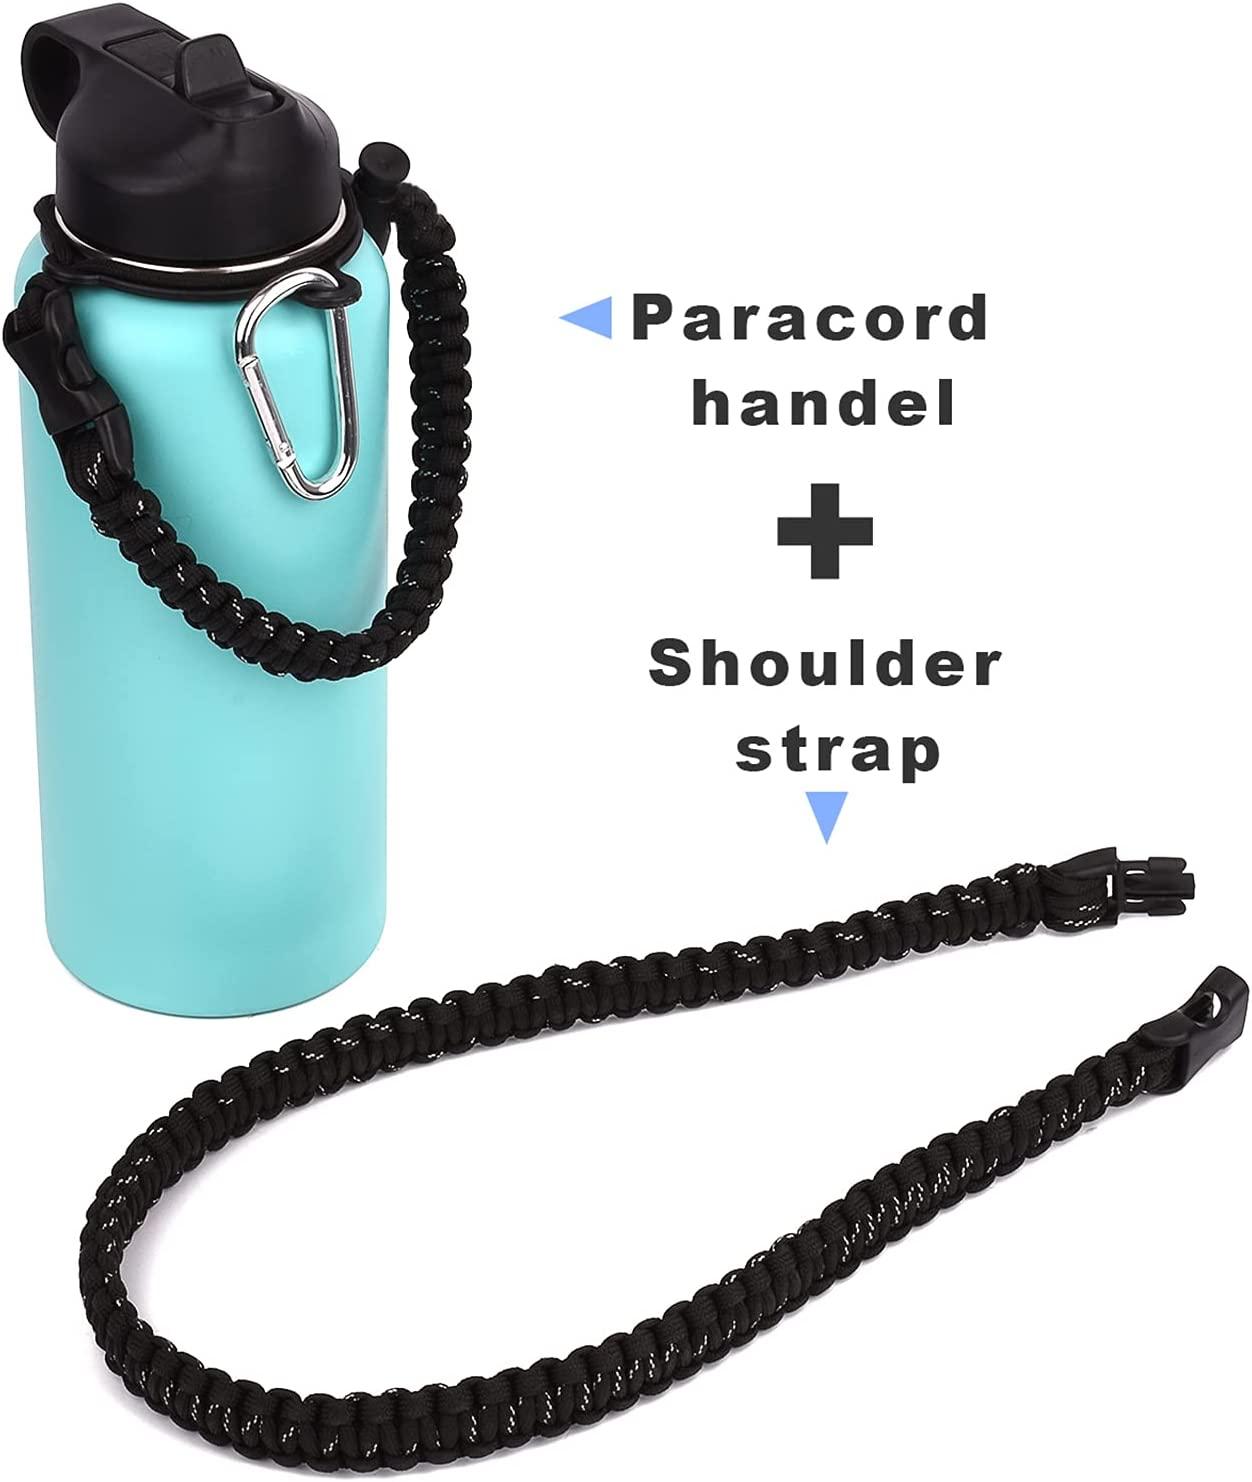 X-CWLTEZ Paracord Handle for Hydro, Giveaway Service